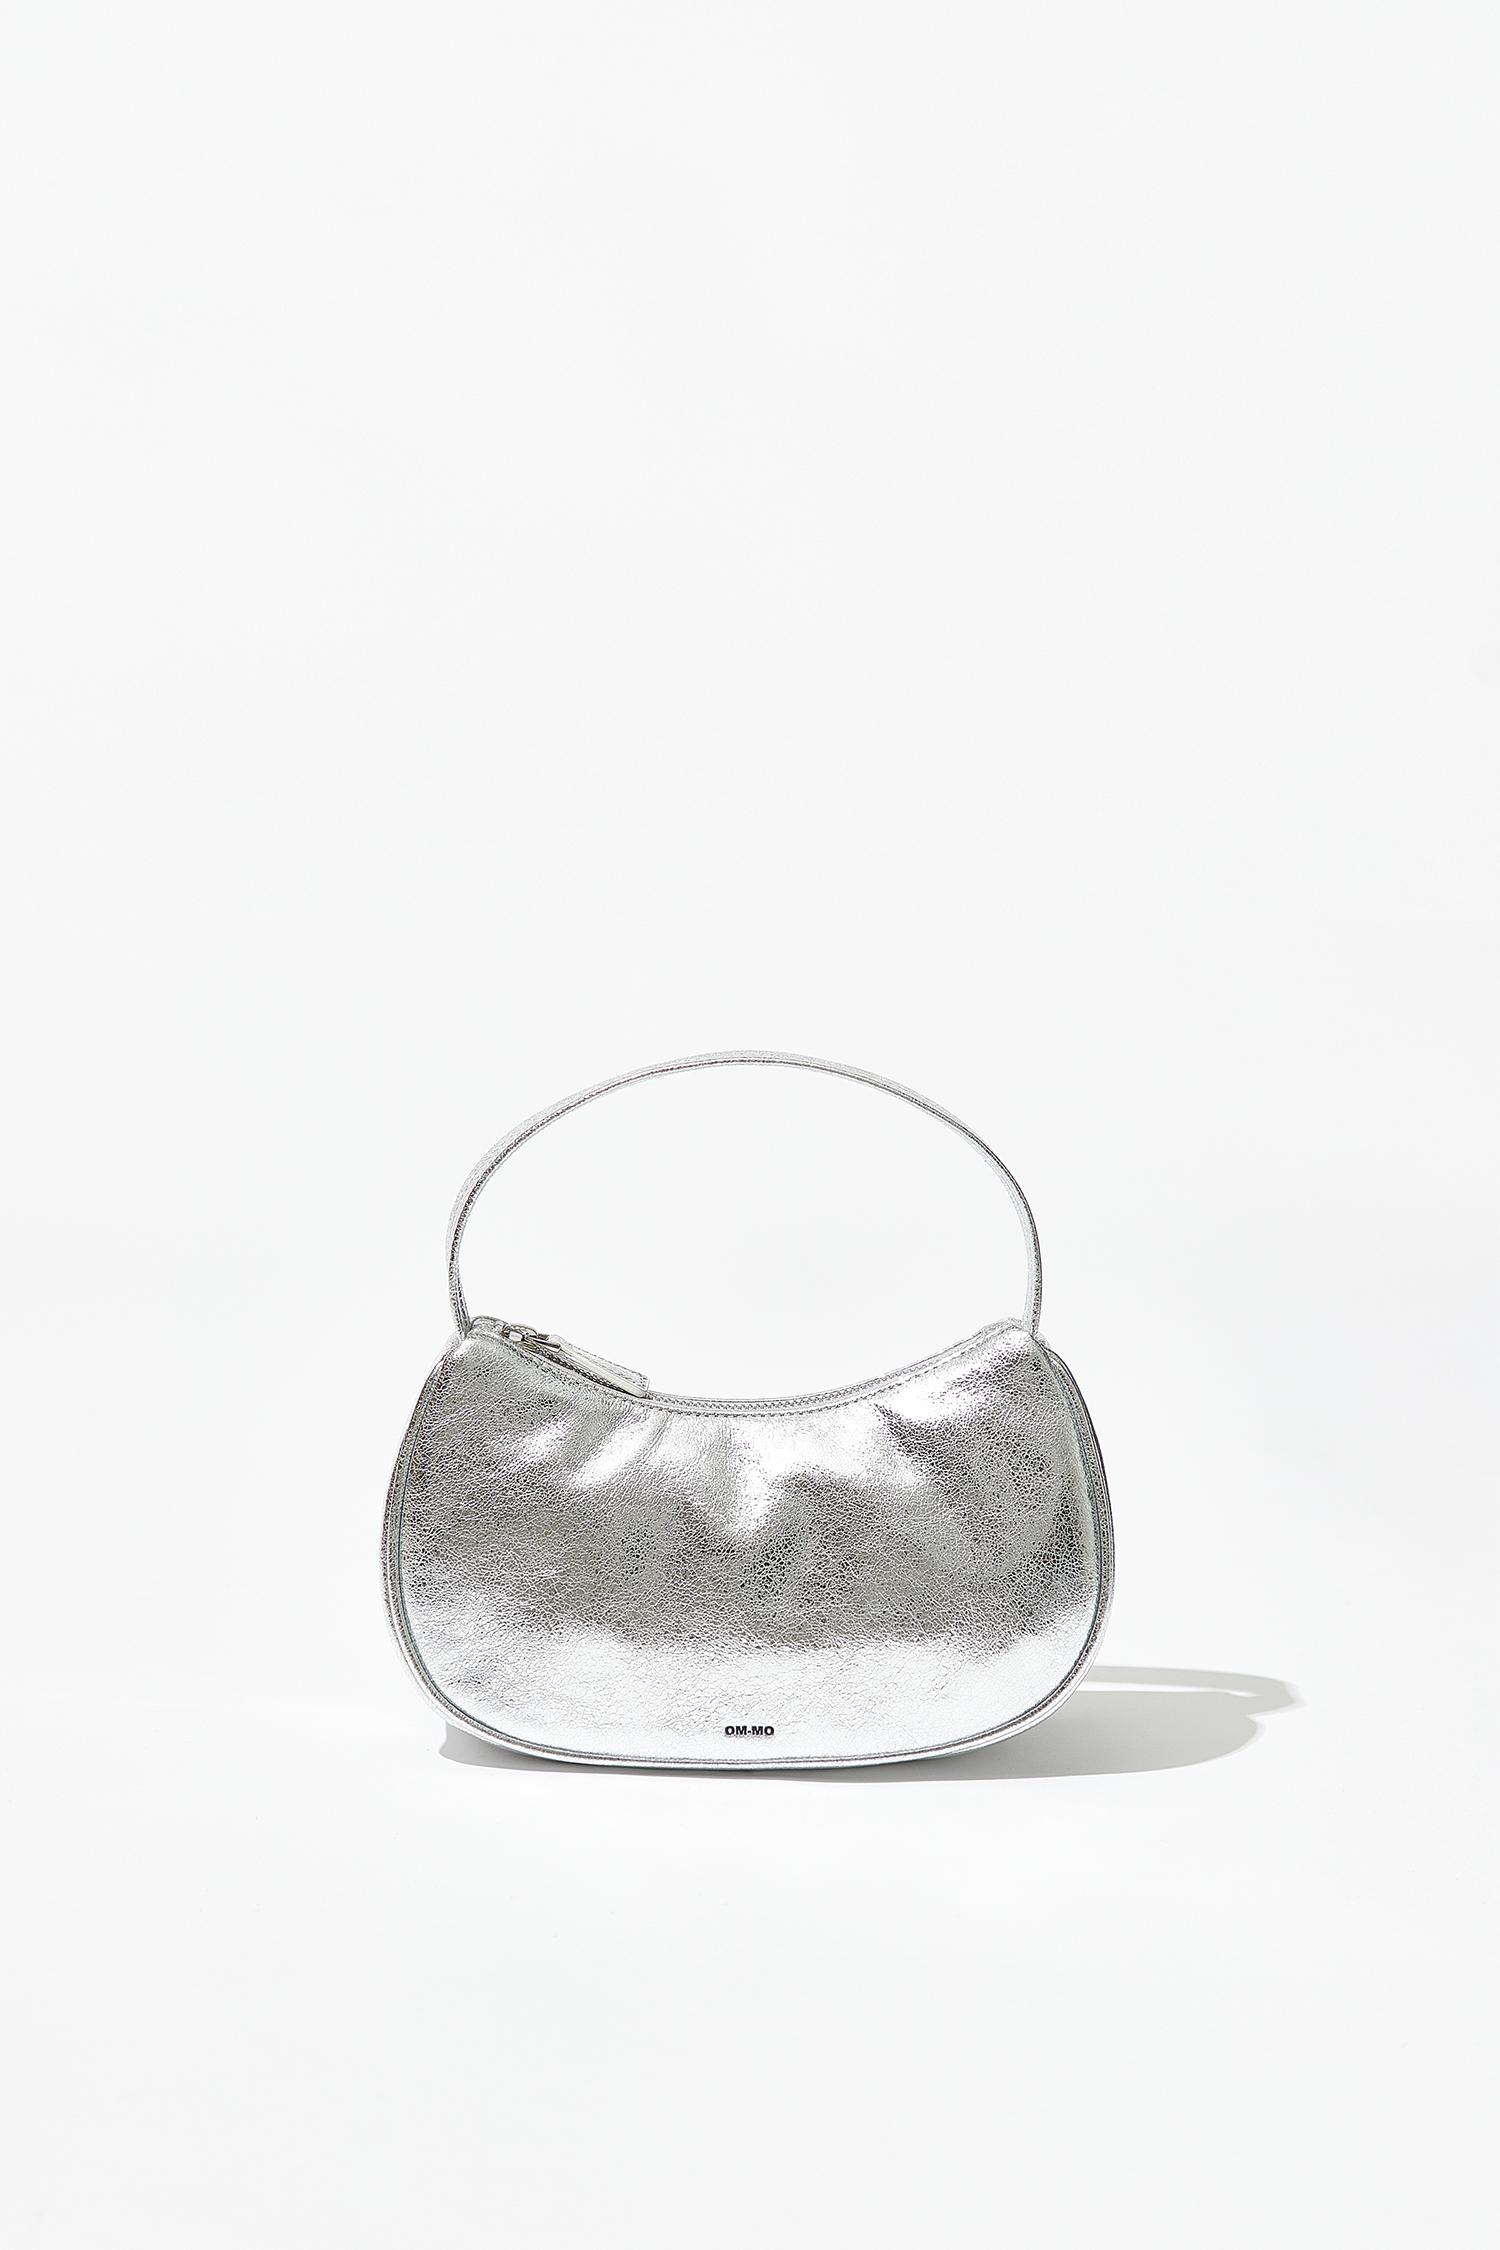 NUA BAG (SILVER) - GOAT PATENT LEATHER